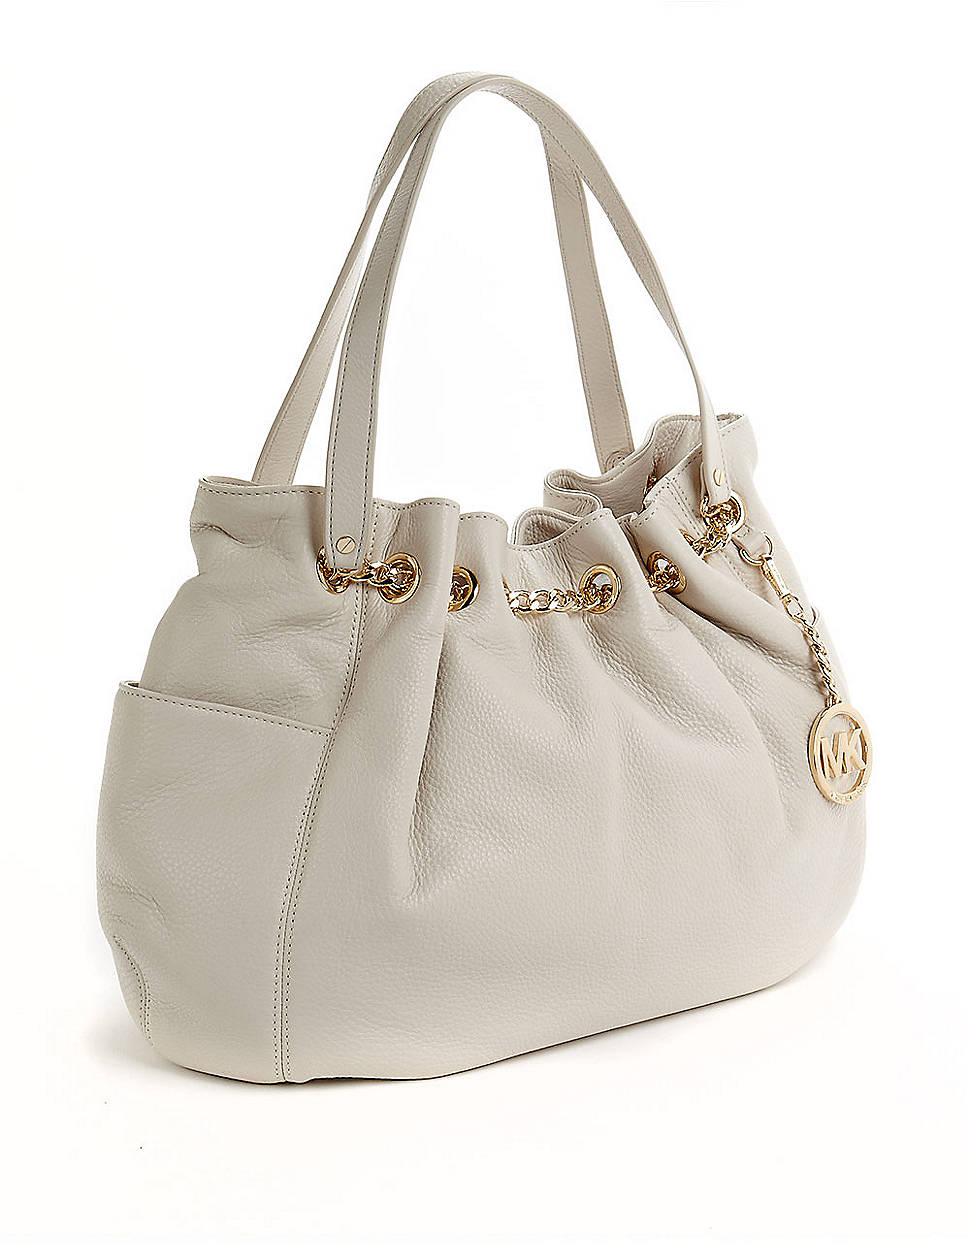 Michael Michael Kors Jet Set Chain Ring Leather Tote Bag in Beige ...